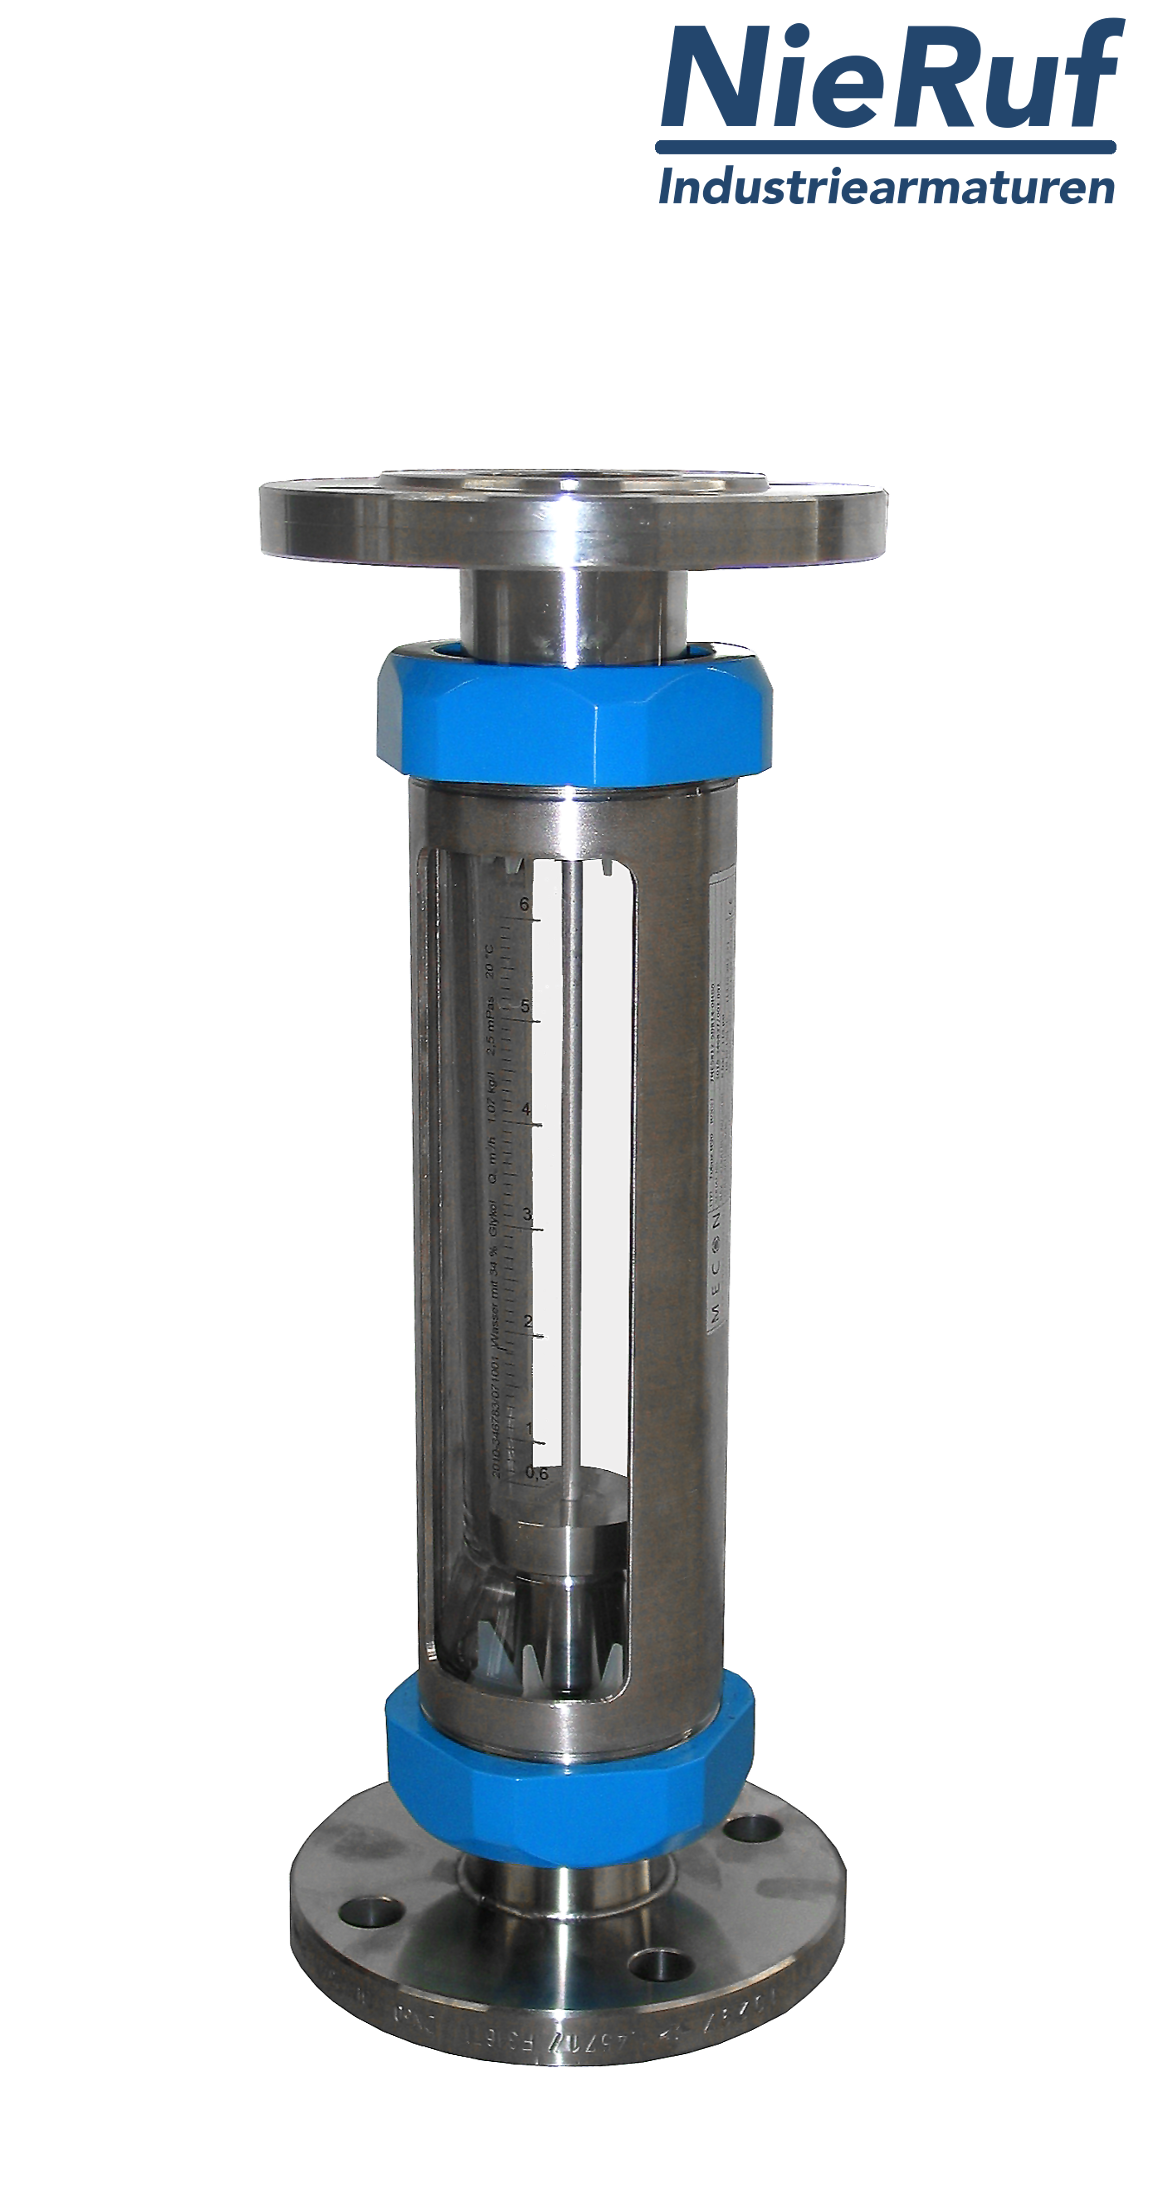 Variable area flowmeter stainless steel + borosilicate flange DN10 12.5 - 125.0 l/h water FKM